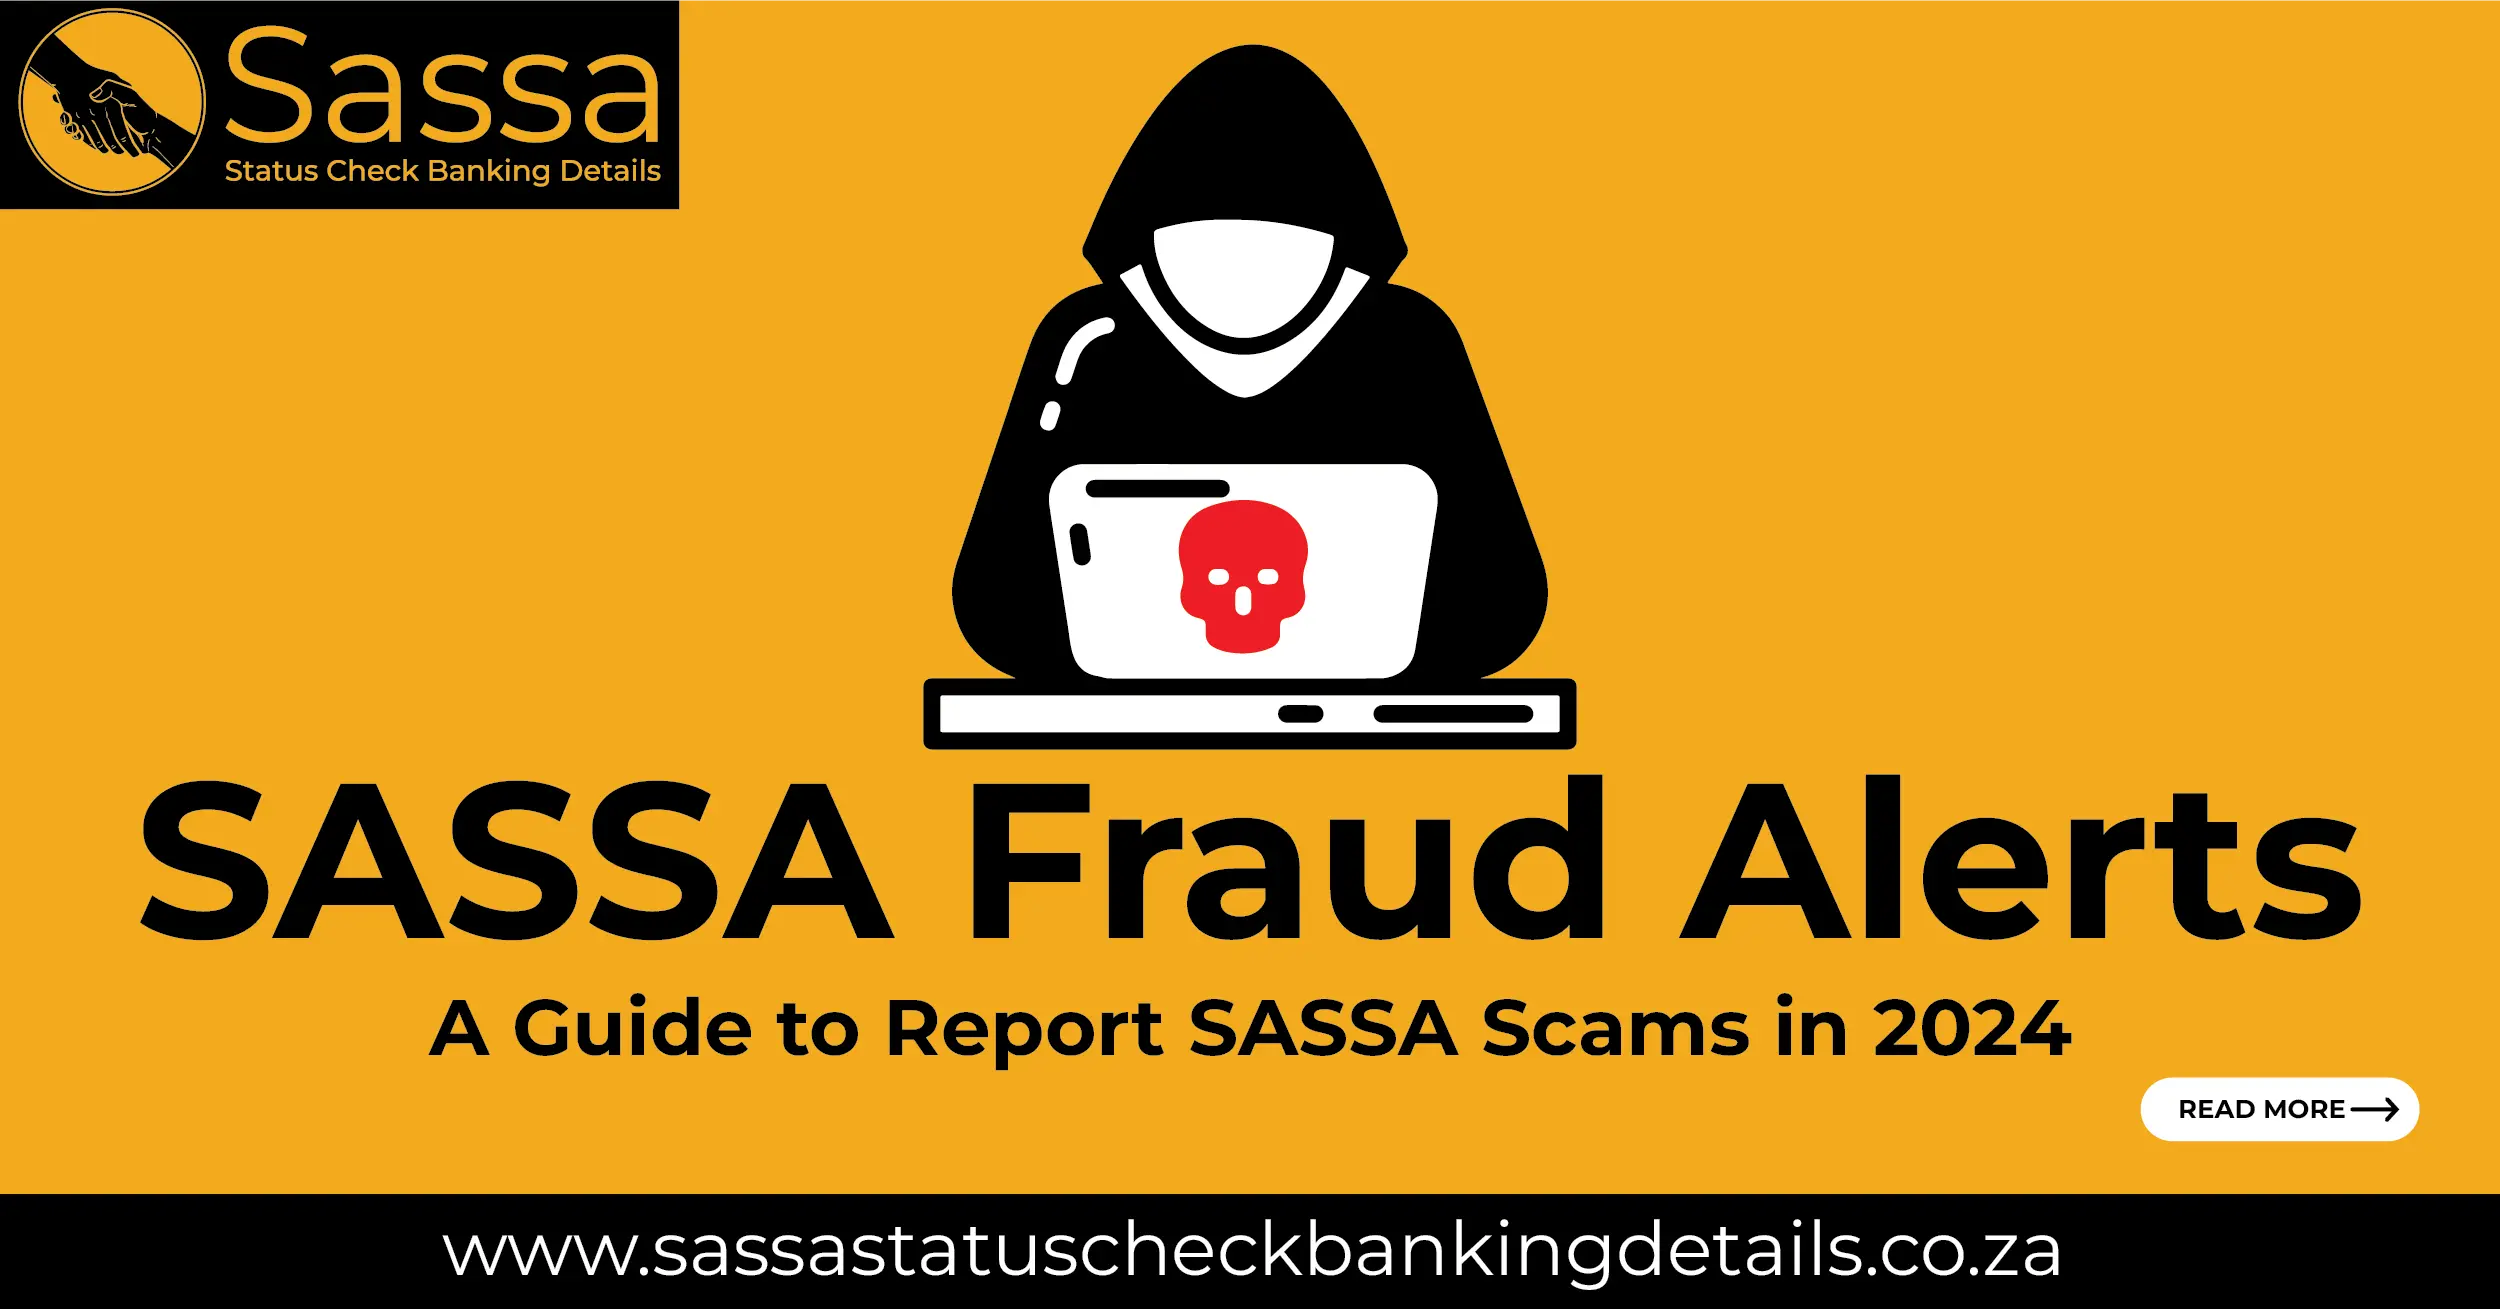 SASSA Fraud Alerts: A Guide to Report SASSA Scams in 2024